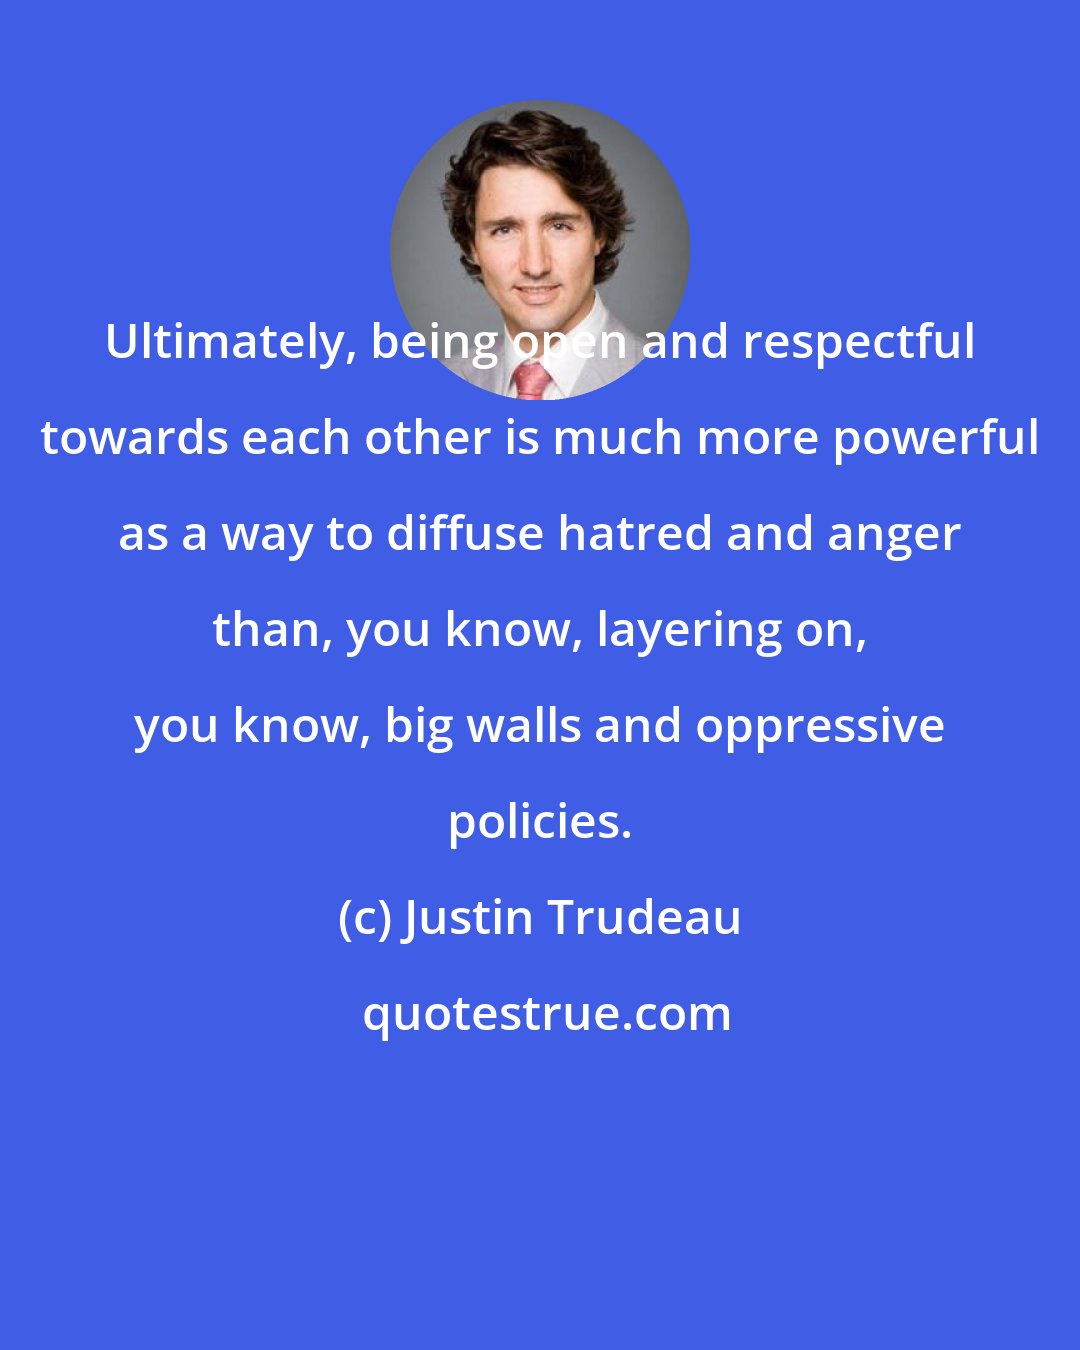 Justin Trudeau: Ultimately, being open and respectful towards each other is much more powerful as a way to diffuse hatred and anger than, you know, layering on, you know, big walls and oppressive policies.